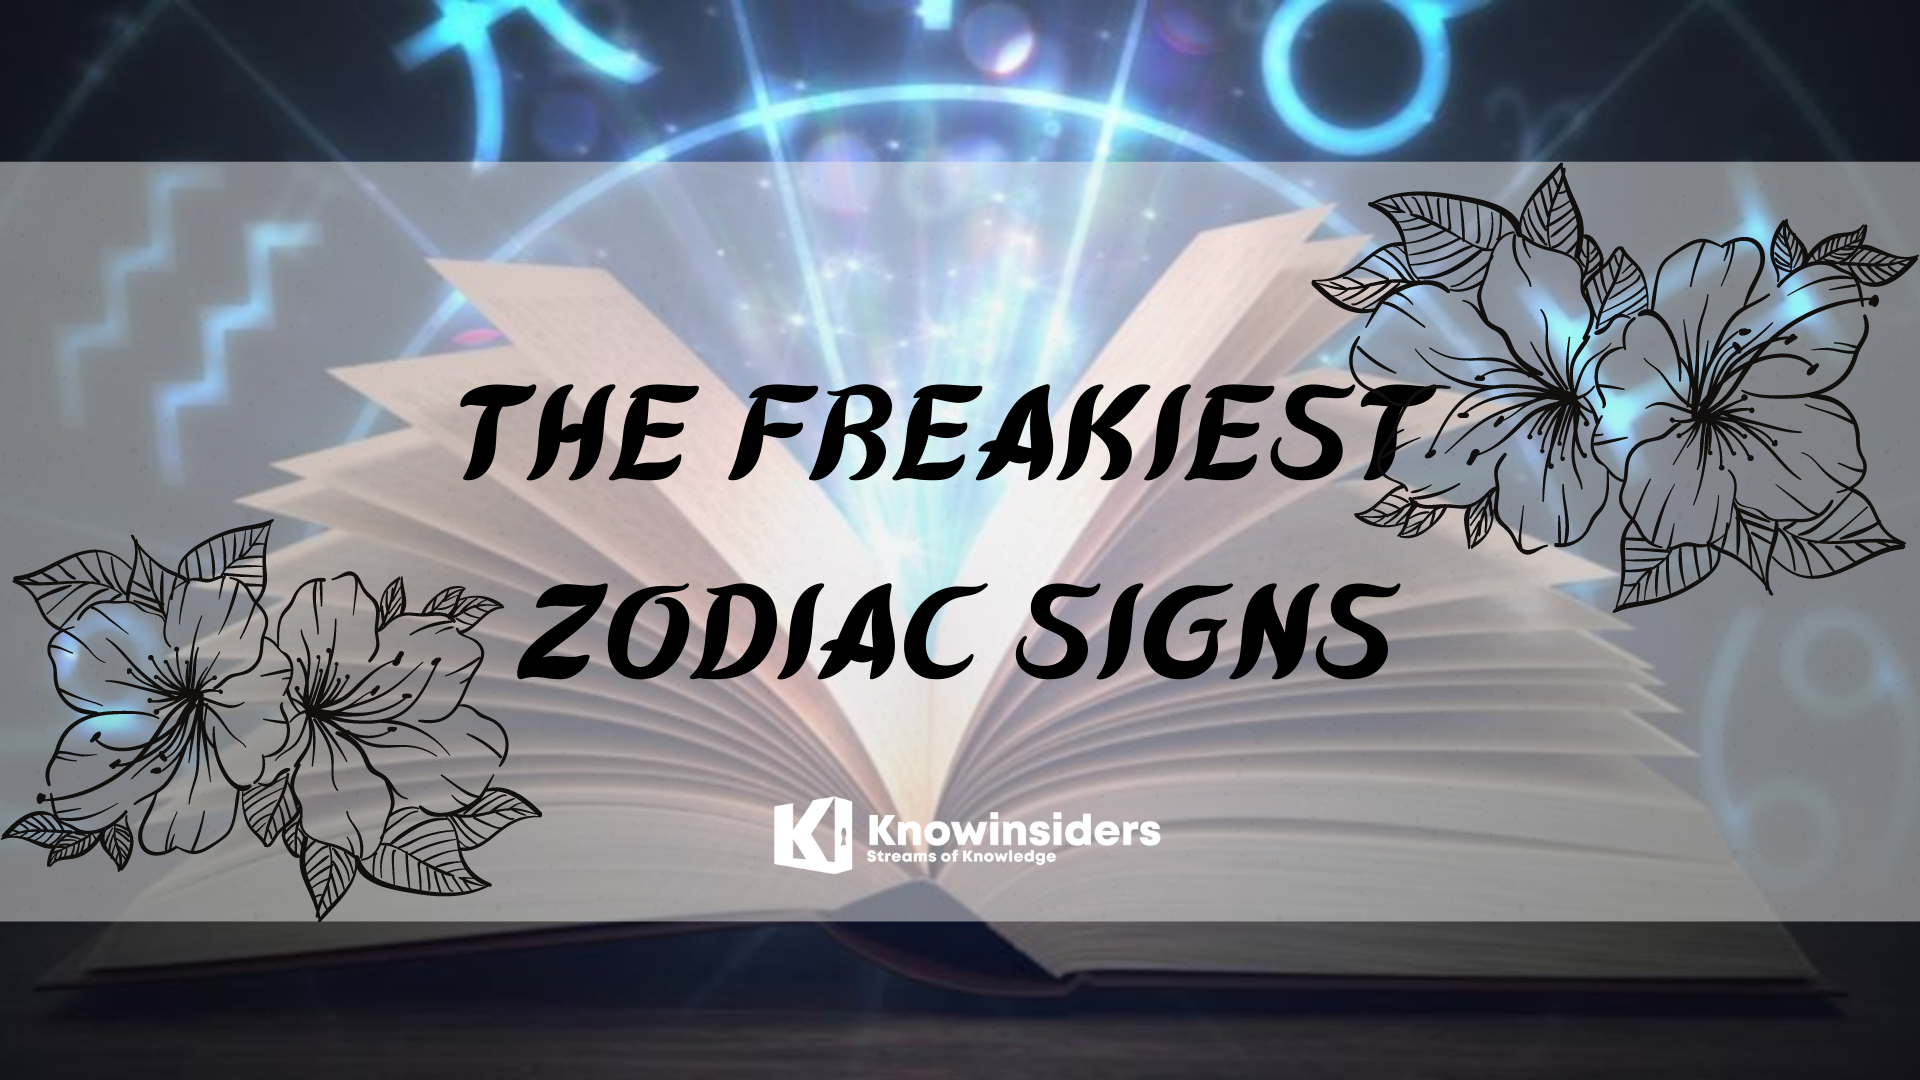 Zodiac bed worst sign in Zodiac Signs